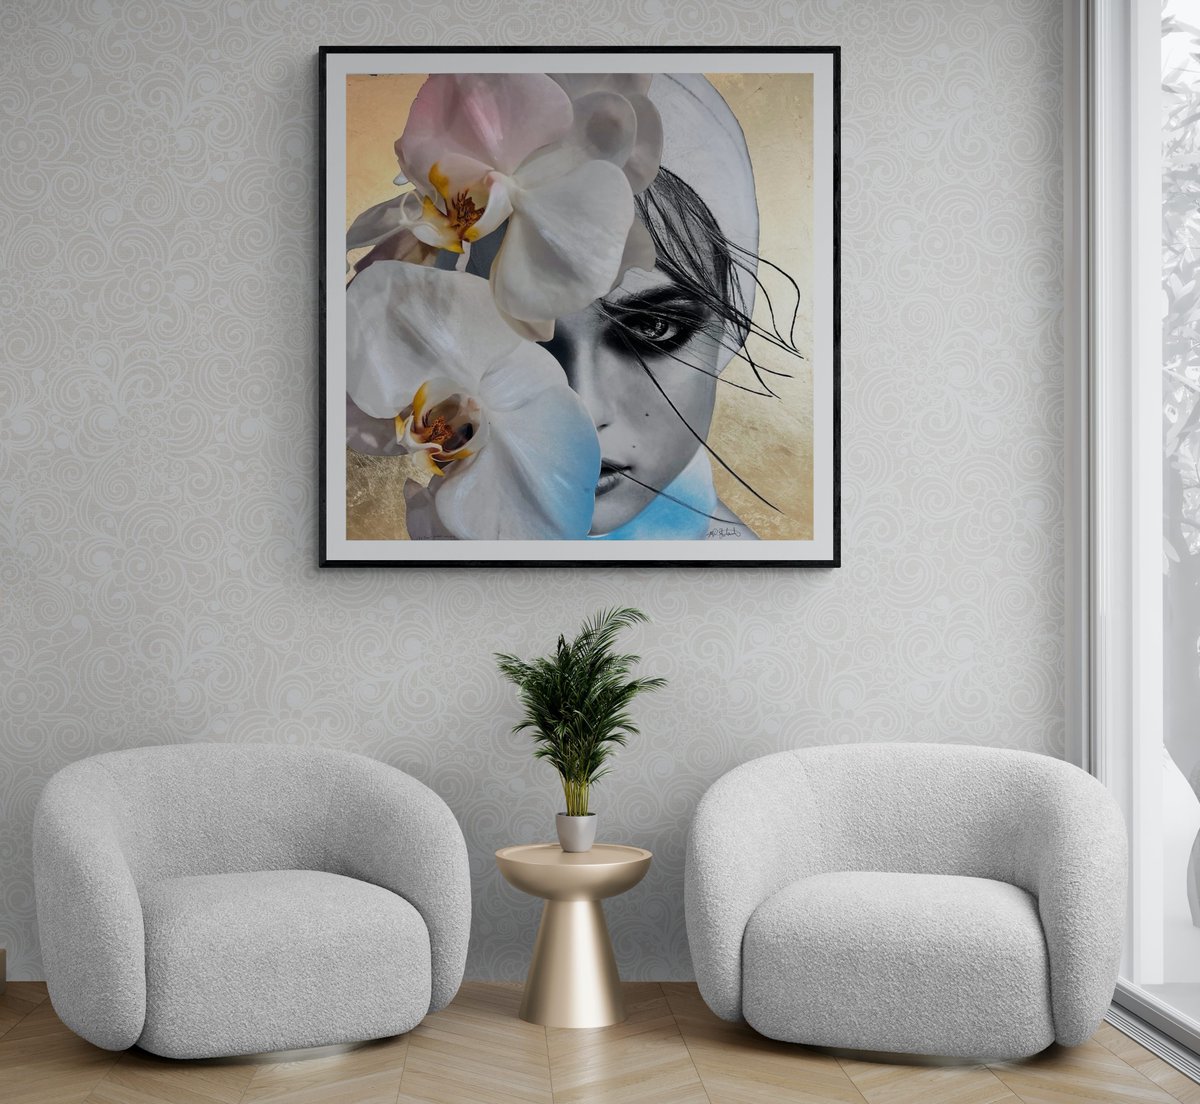 “Can you see me? All of me? Probably not. No one ever really has.” ~ Jeffrey Eugenides
Get Your Art Fix!
'Willow Pastel' by Amanda Johnstone, 2023 bit.ly/46qo0mw
#contemporaryart #femaleform #beauty #flora #womeninart #storytelling #artgallery #buyart  #artcollecting